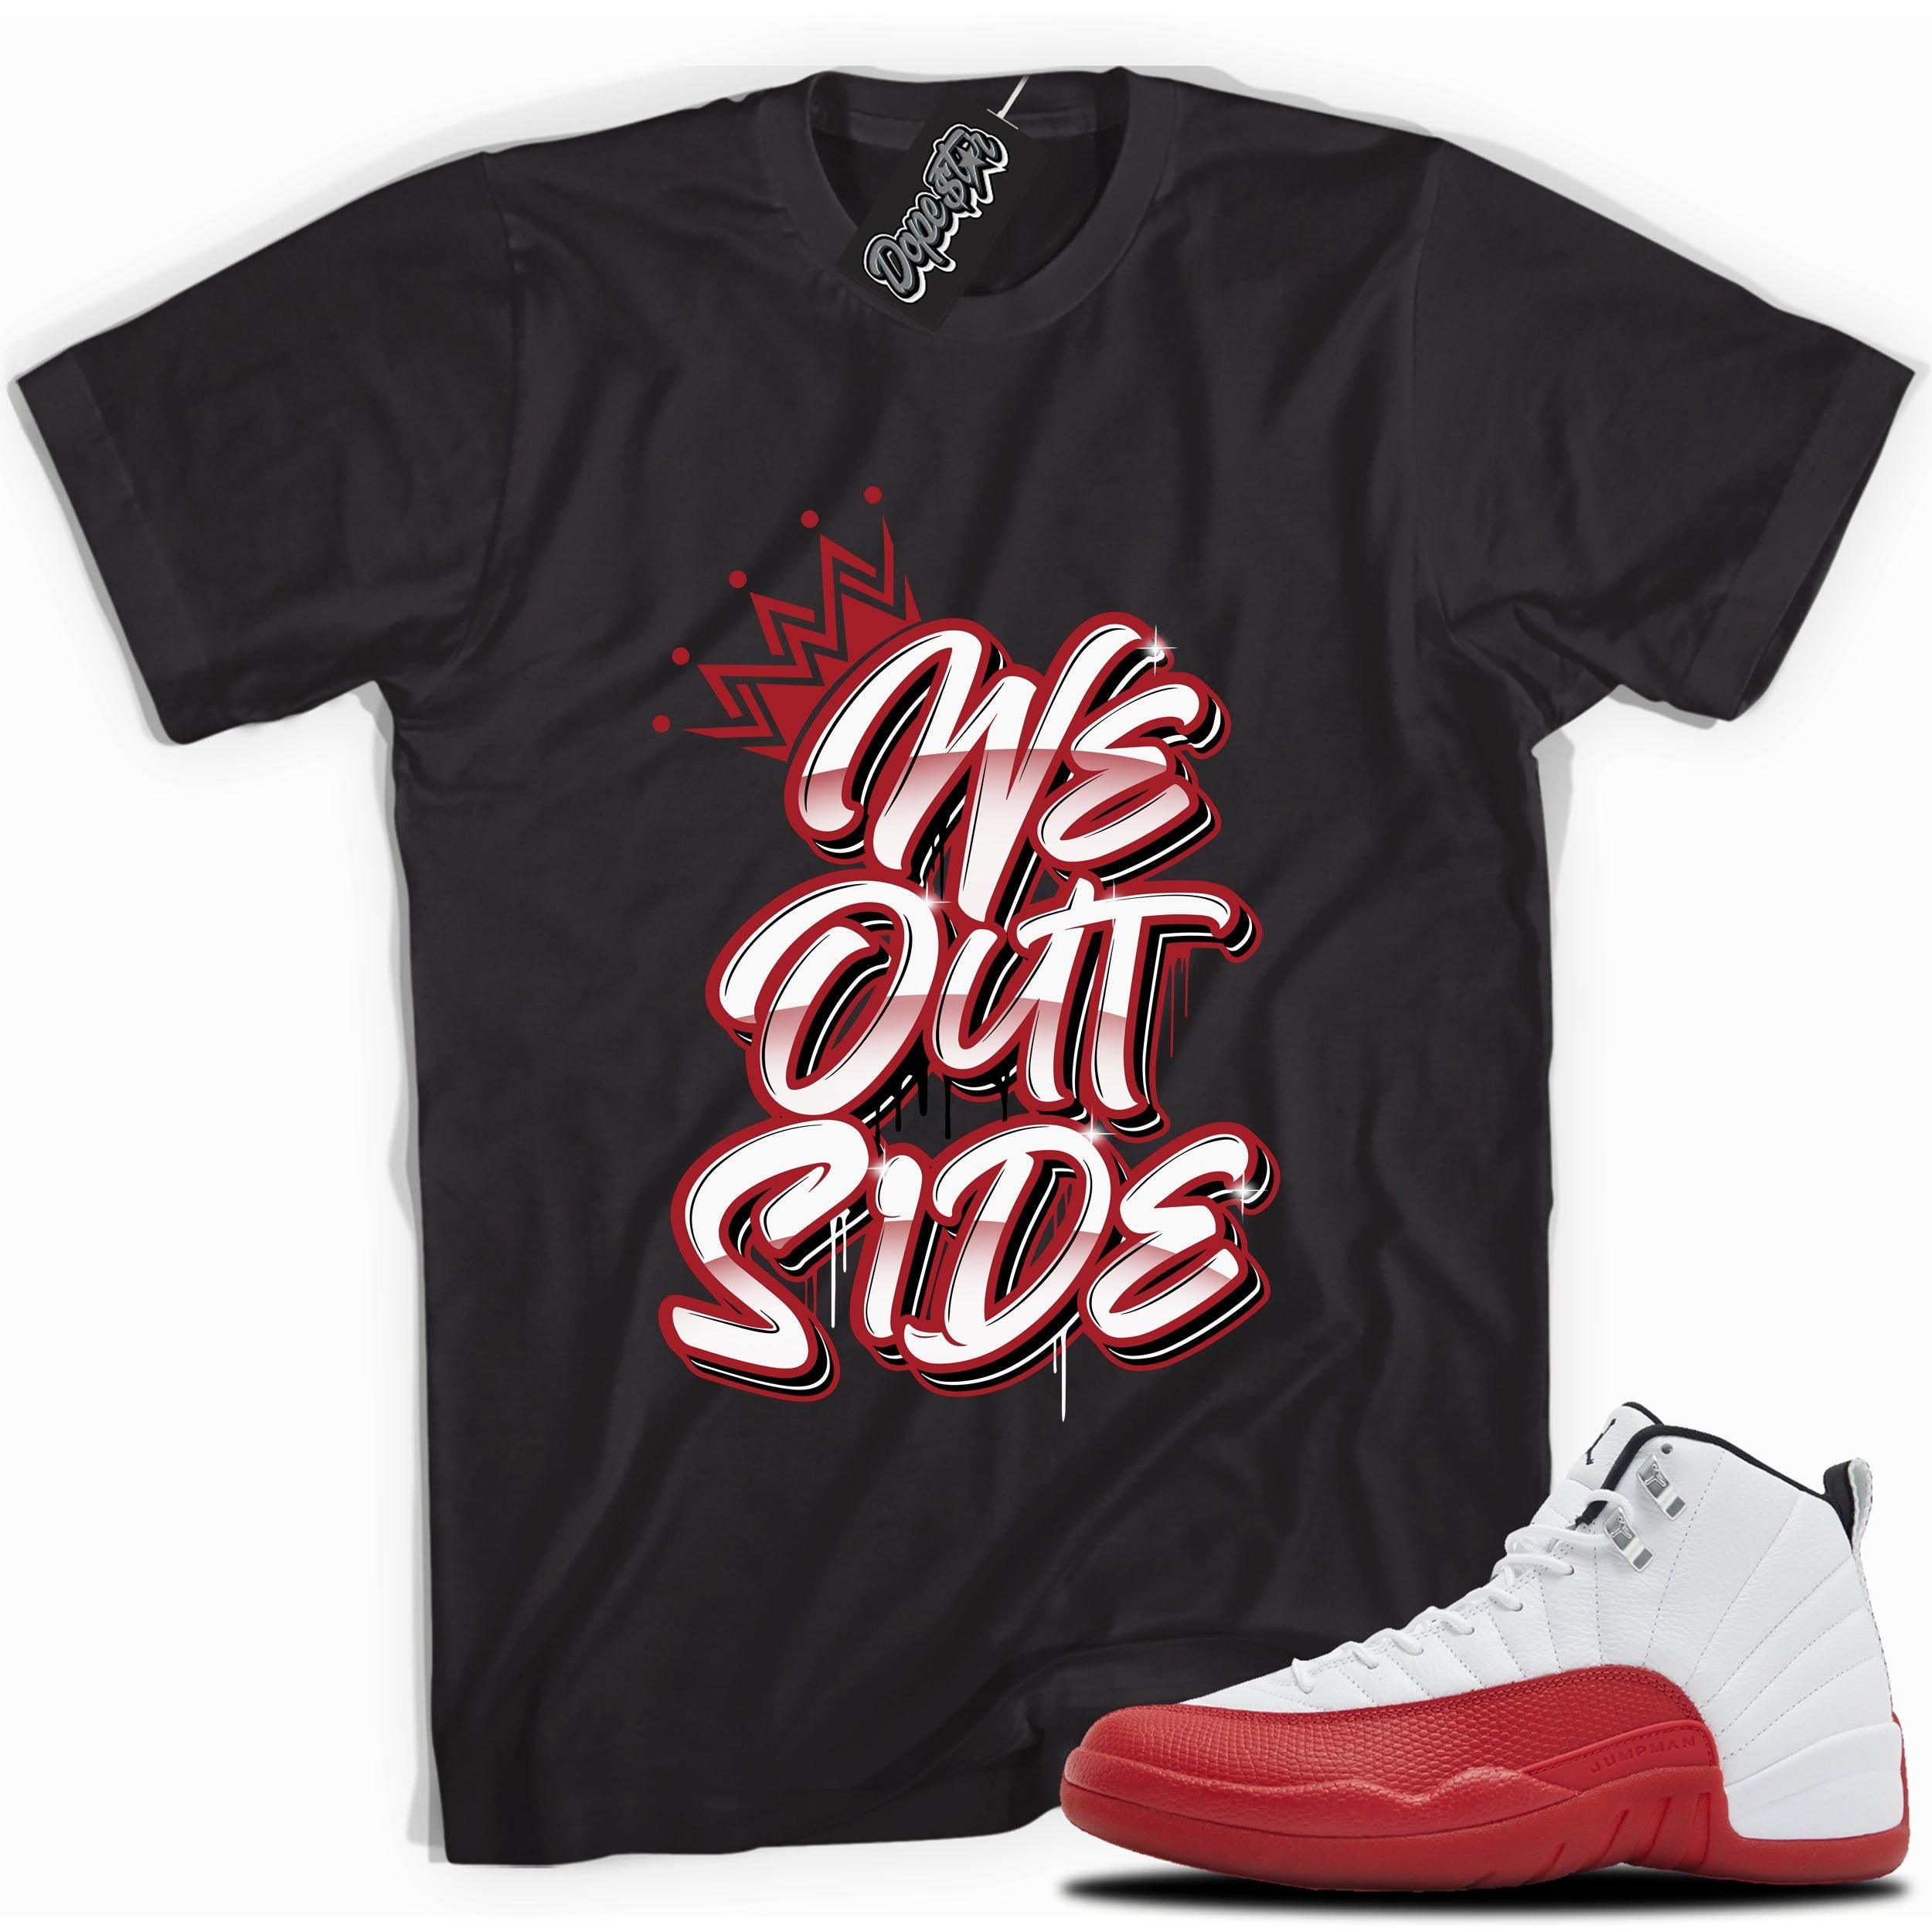 Cool black graphic tee with “We Out Side” print, that perfectly matches Air Jordan 12 Retro Cherry Red 2023 red and white sneakers 